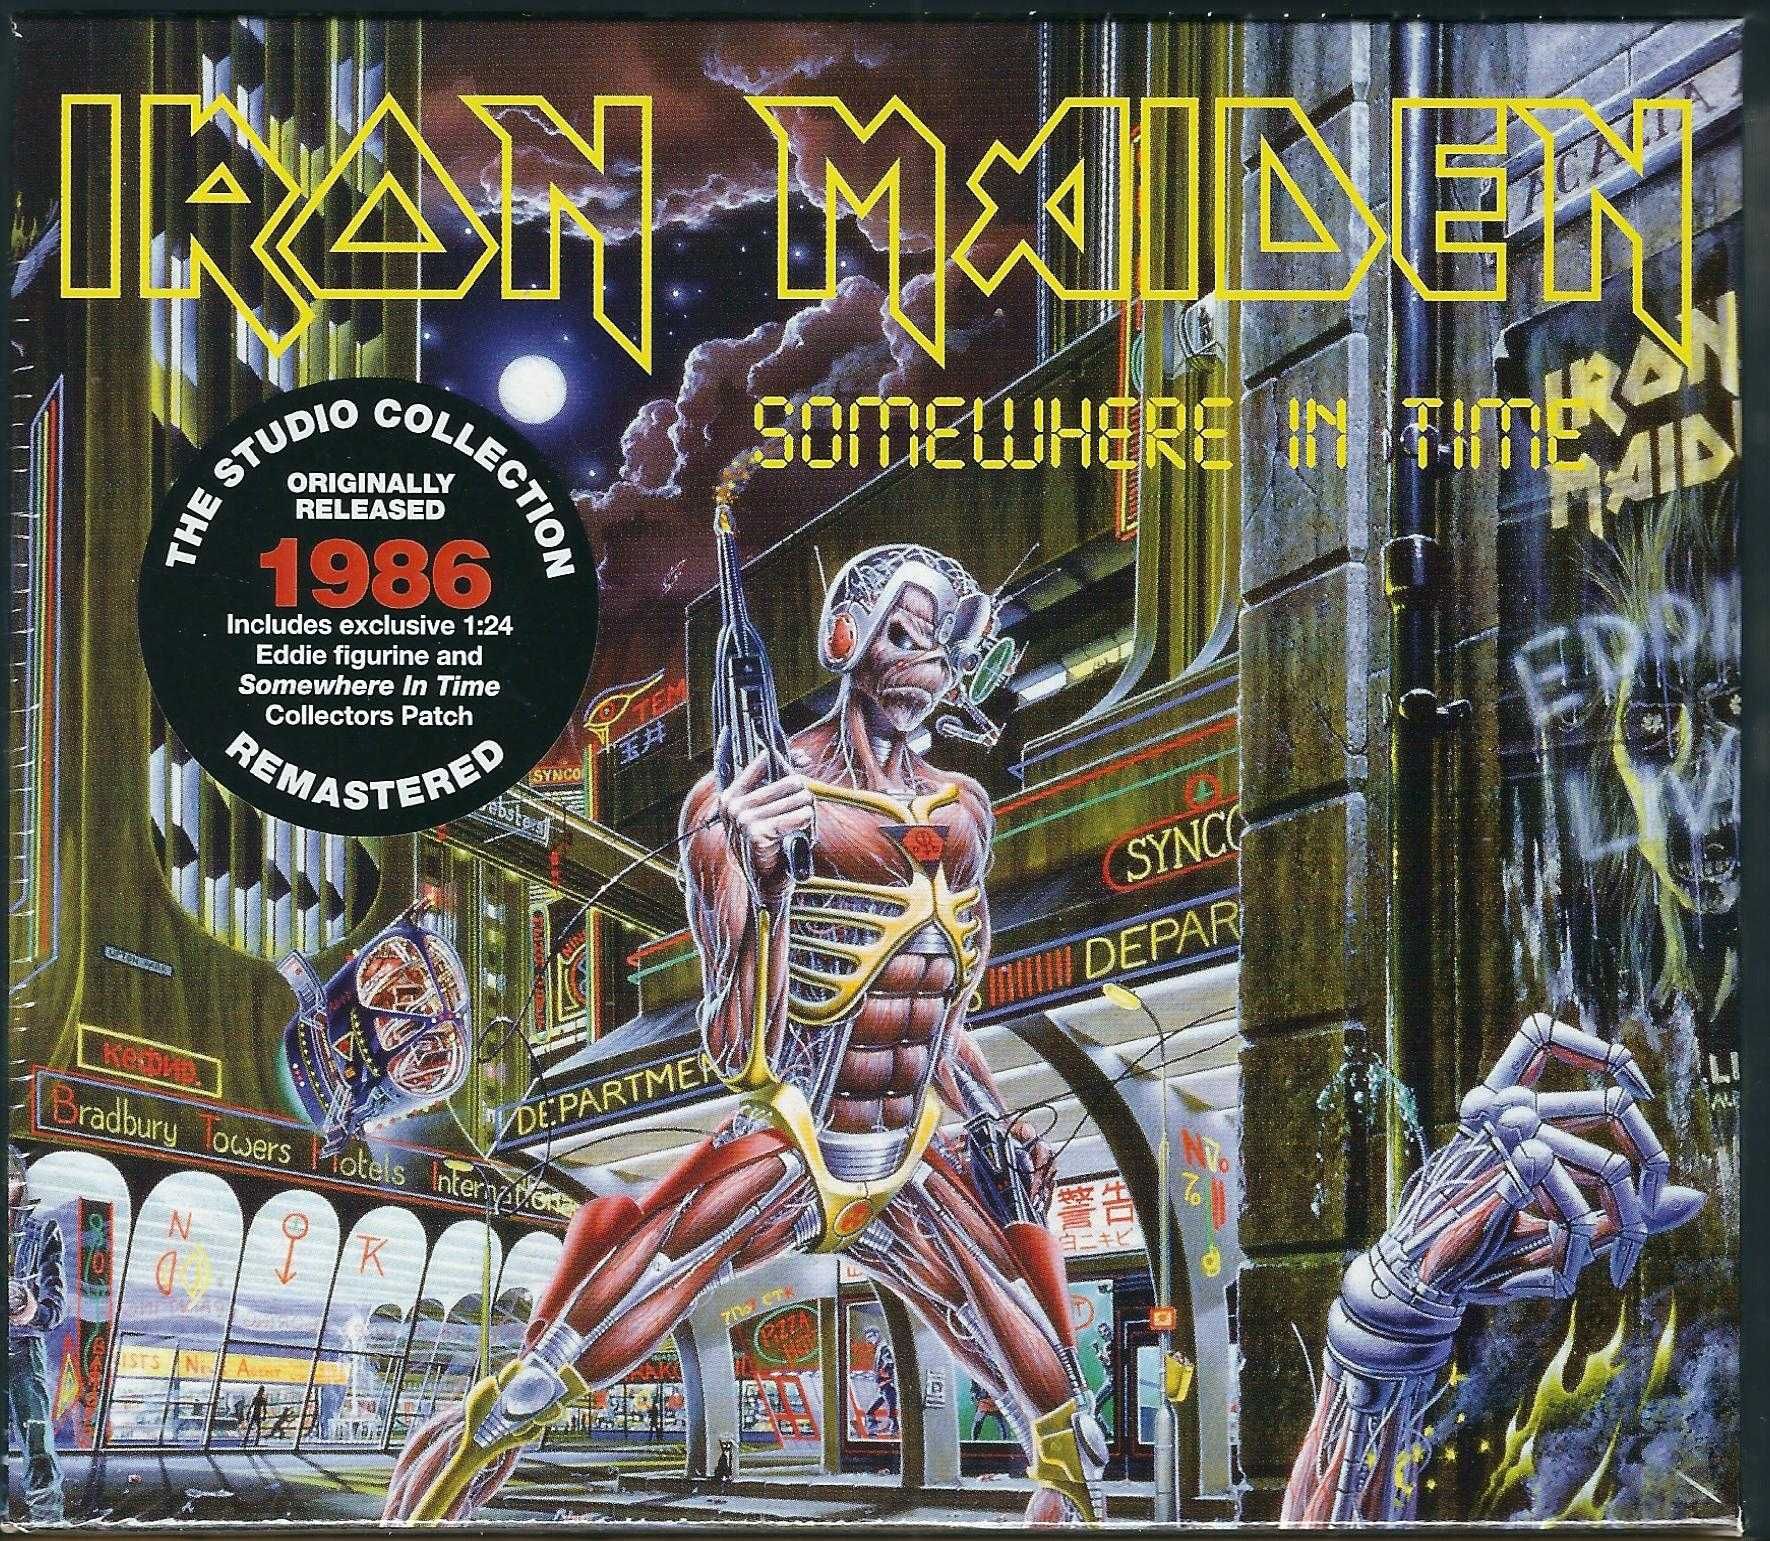 CD Iron Maiden - Somewhere In Time (2019) (Box Set)